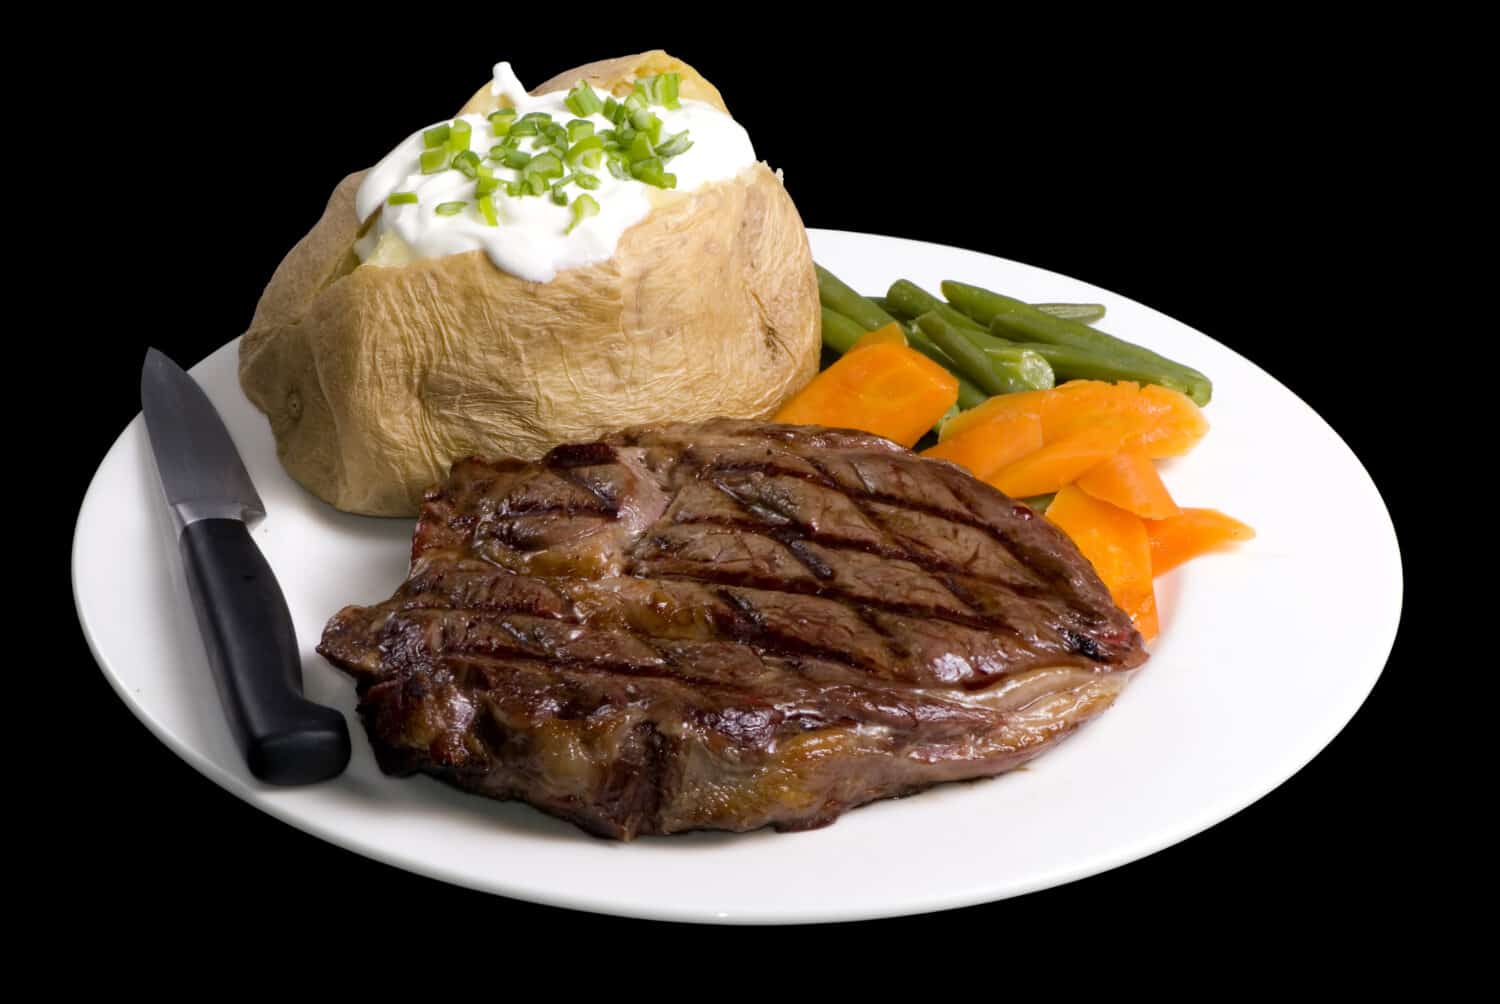 A grilled ribeye steak with baked potato and vegetables.